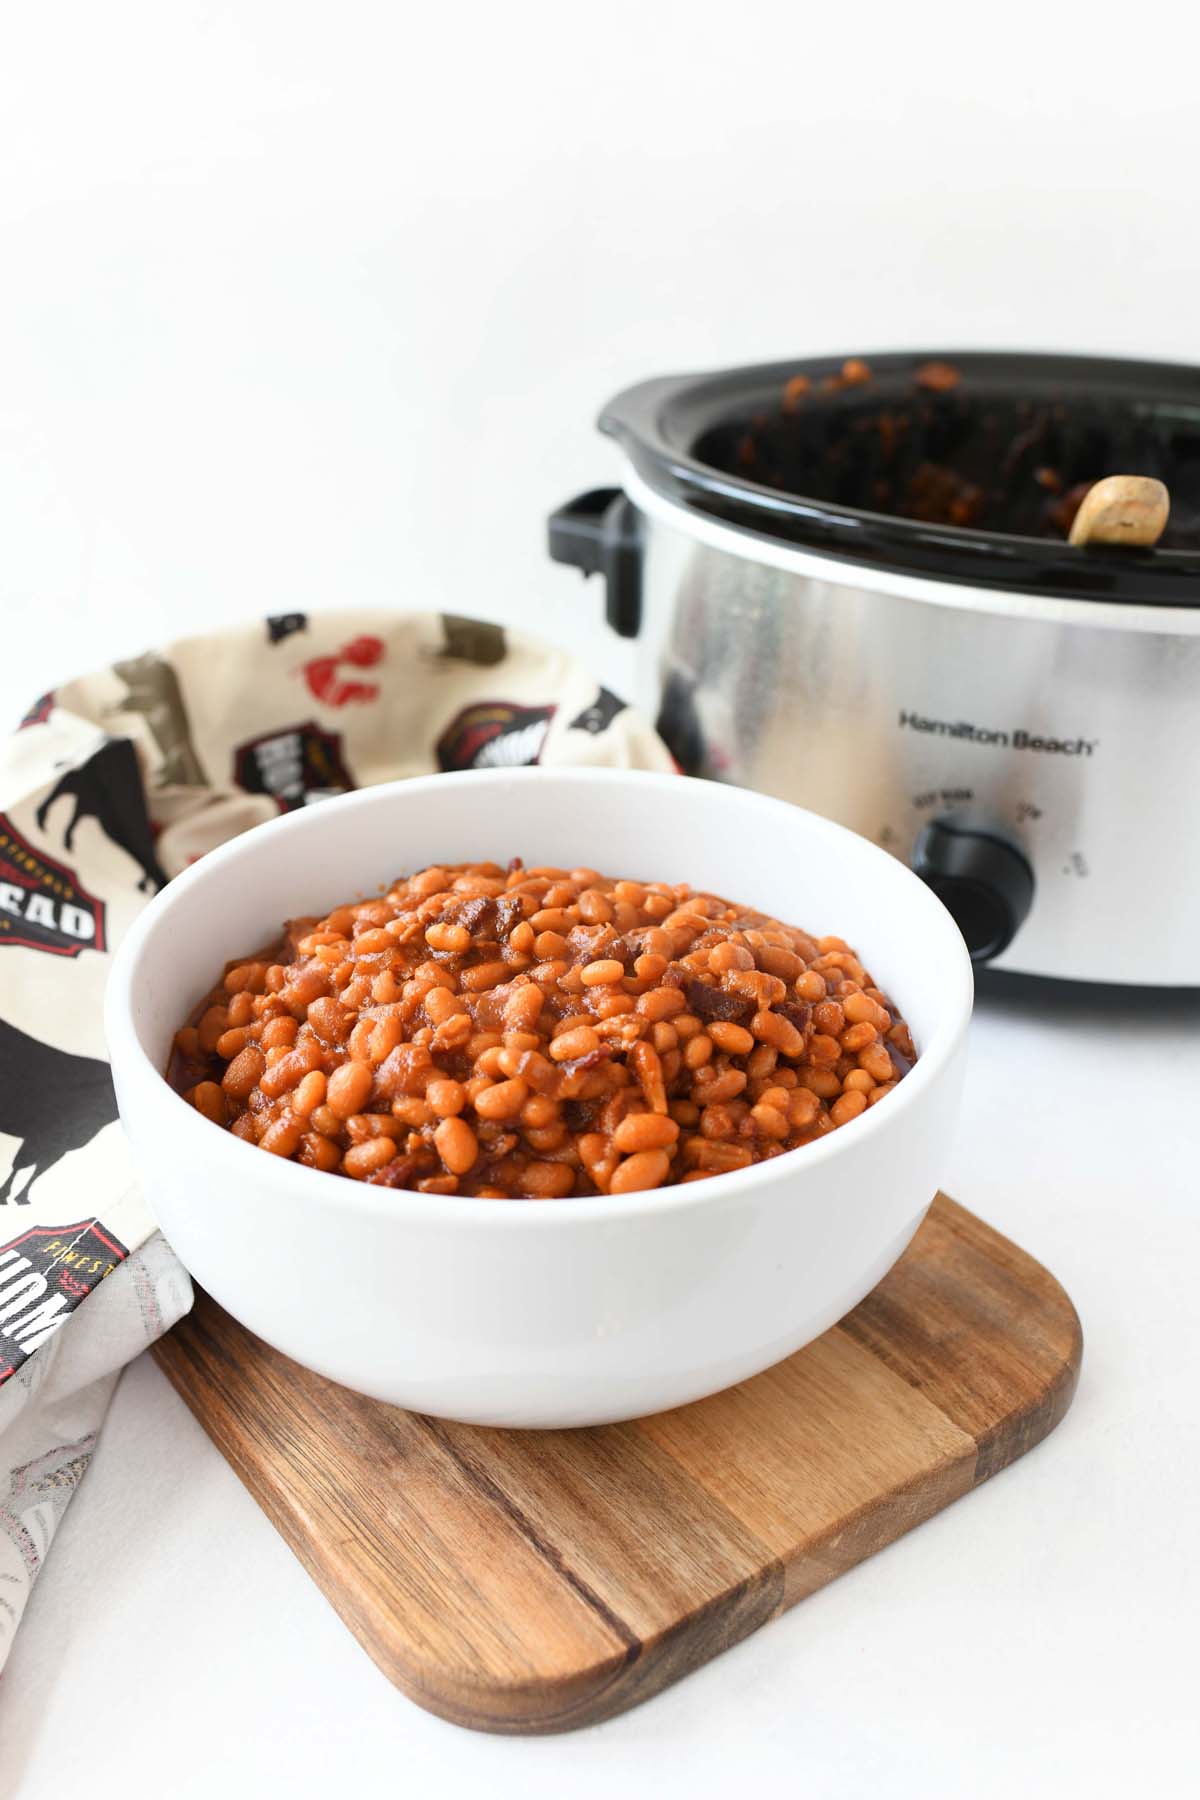 Slow cooker baked beans in a white bowl.